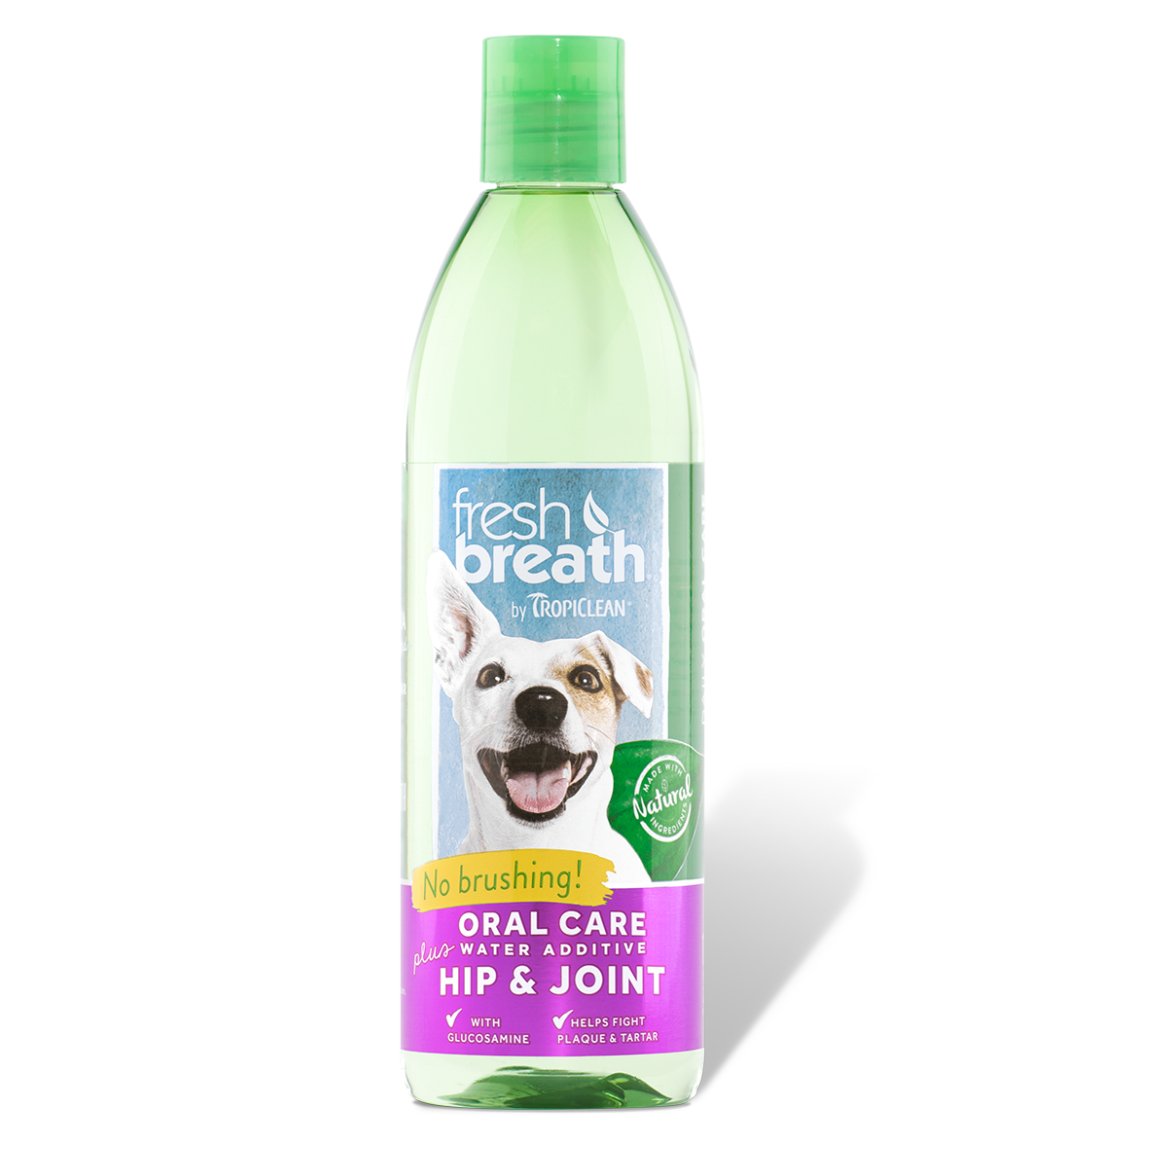 Tropiclean Fresh Breath Oral Dental Care Water Additive for Dogs PLUS Hip & Joint 473ml